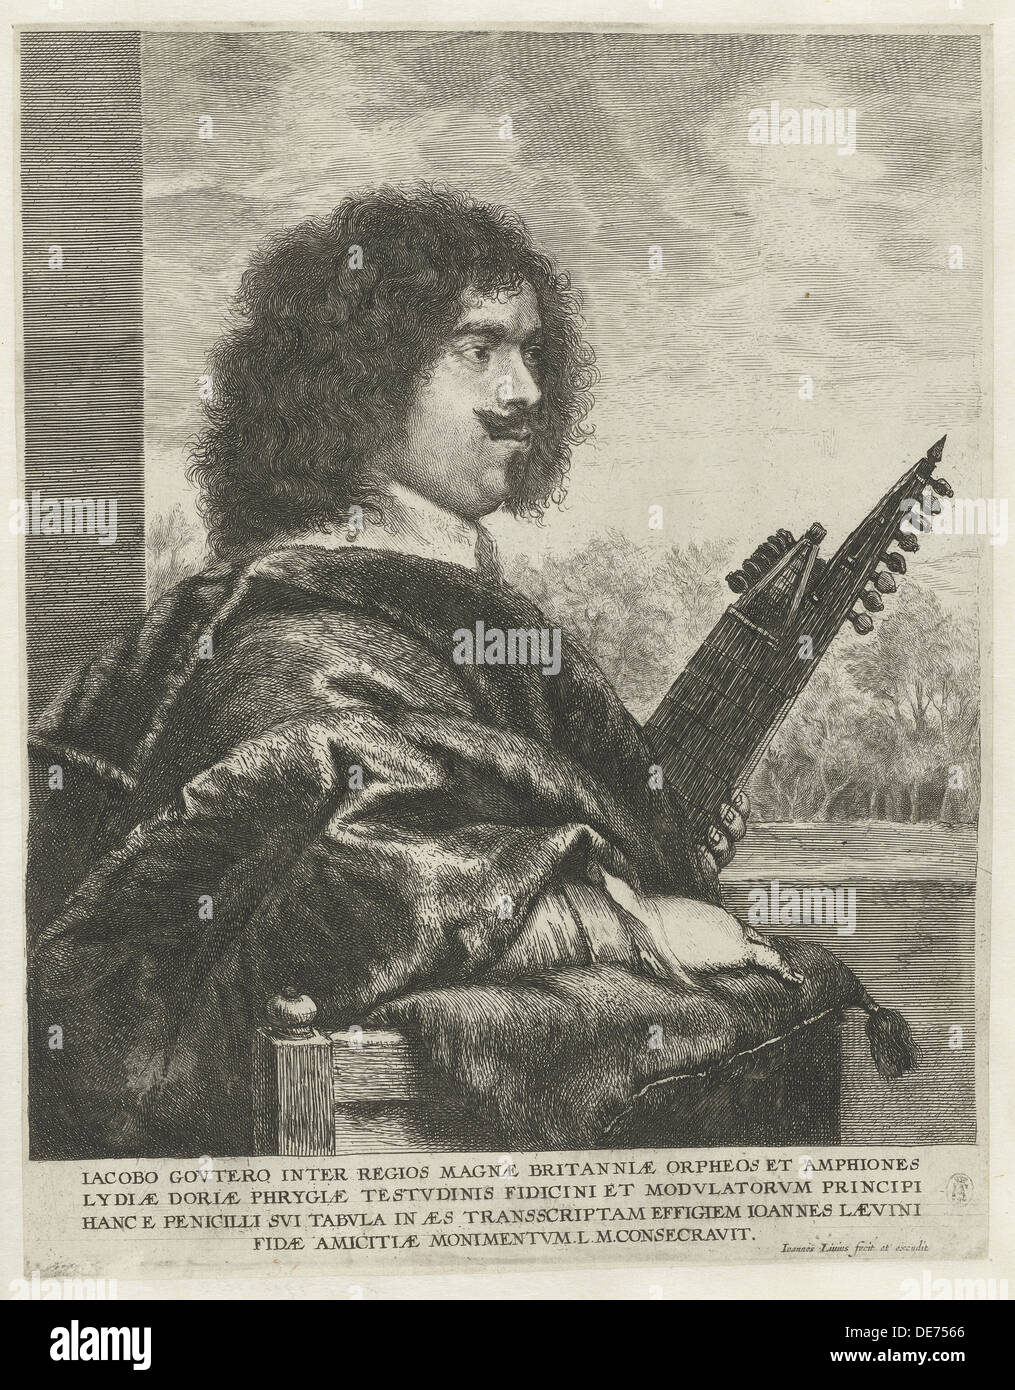 Portrait of the composer and lutenist Jacques Gaultier, 1631-1635. Artist: Lievens, Jan (1607-1674) Stock Photo